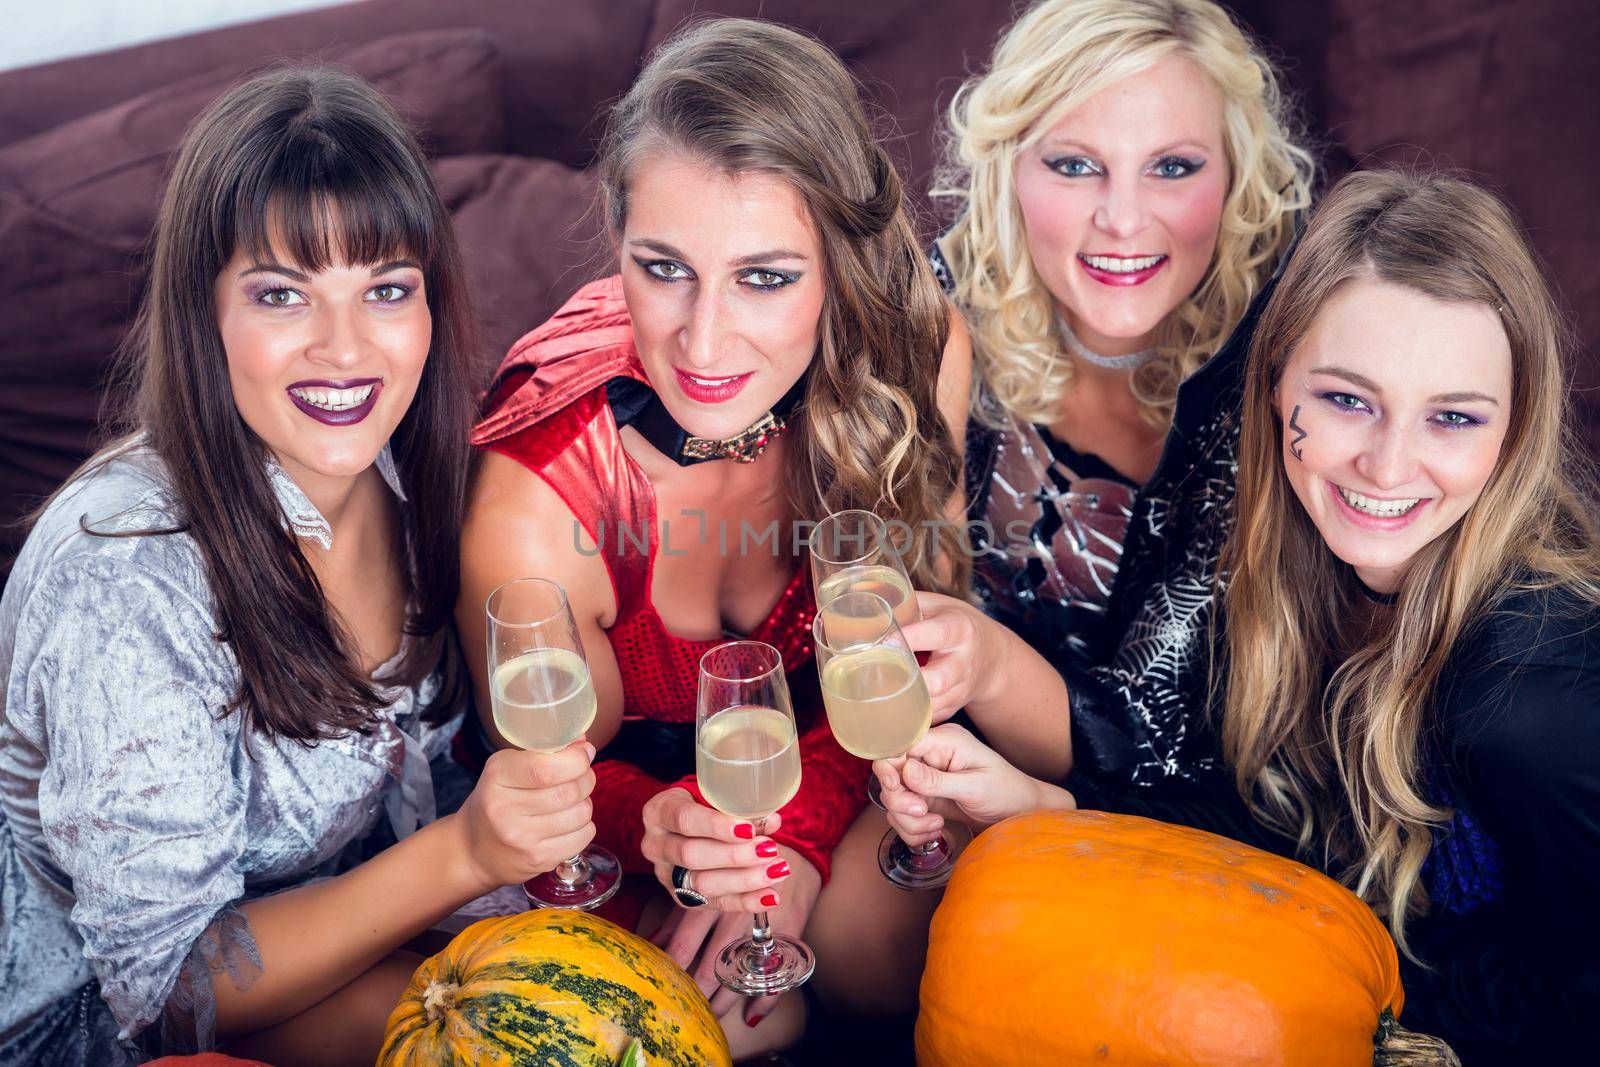 Women posing while toasting together during Halloween party by Kzenon